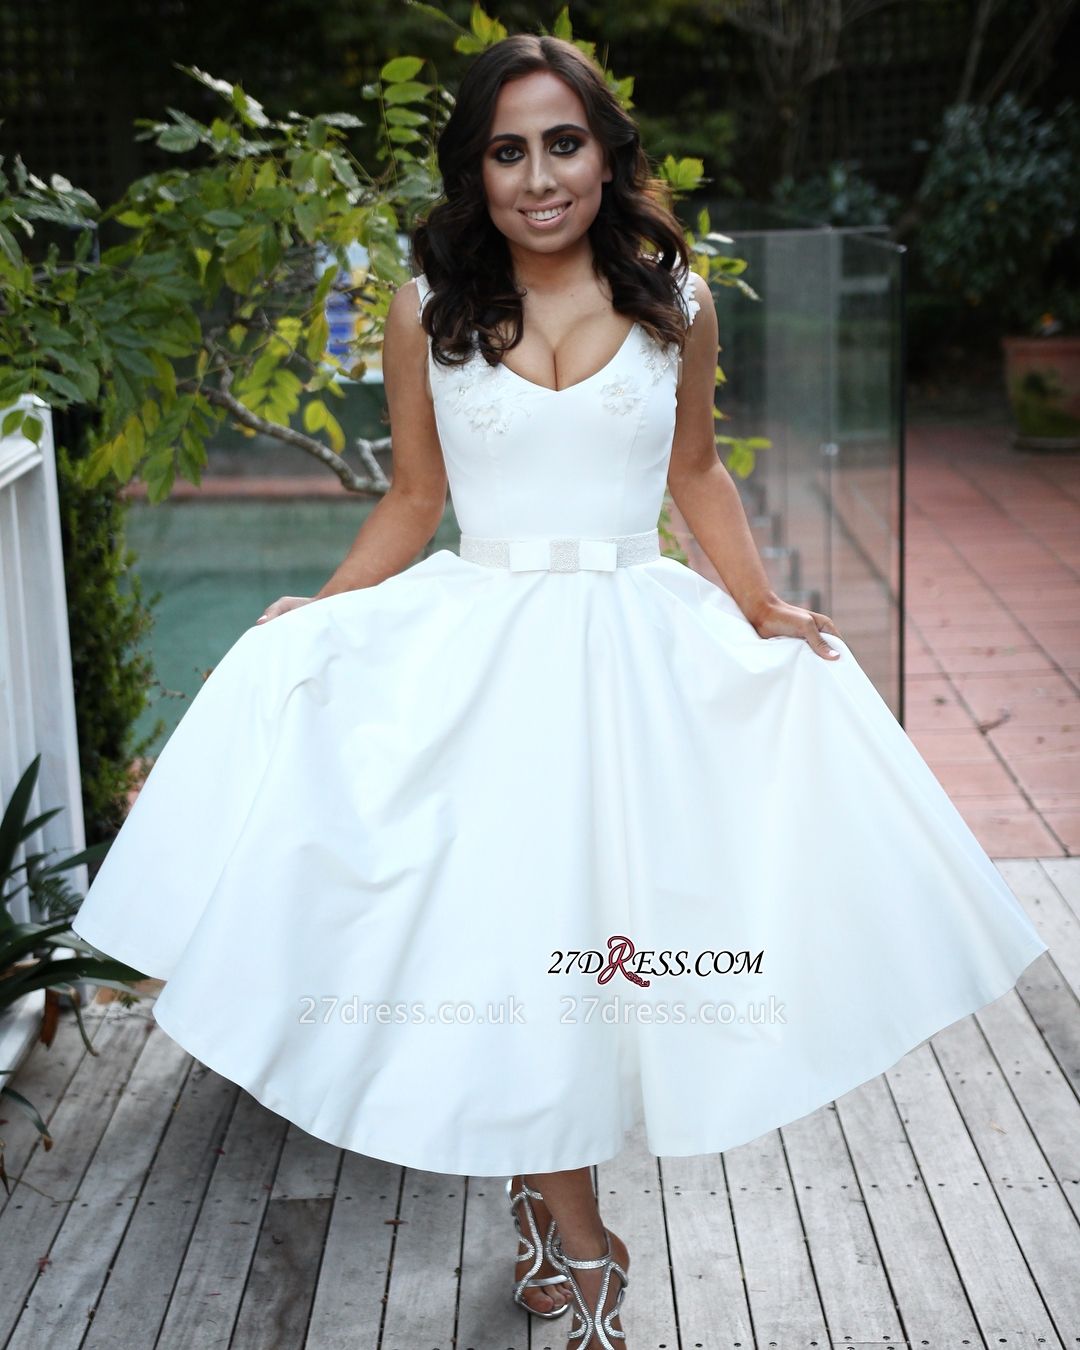 Sexy White Sleeveless Prom Dress UK | A-Line Short Evening Party Gowns